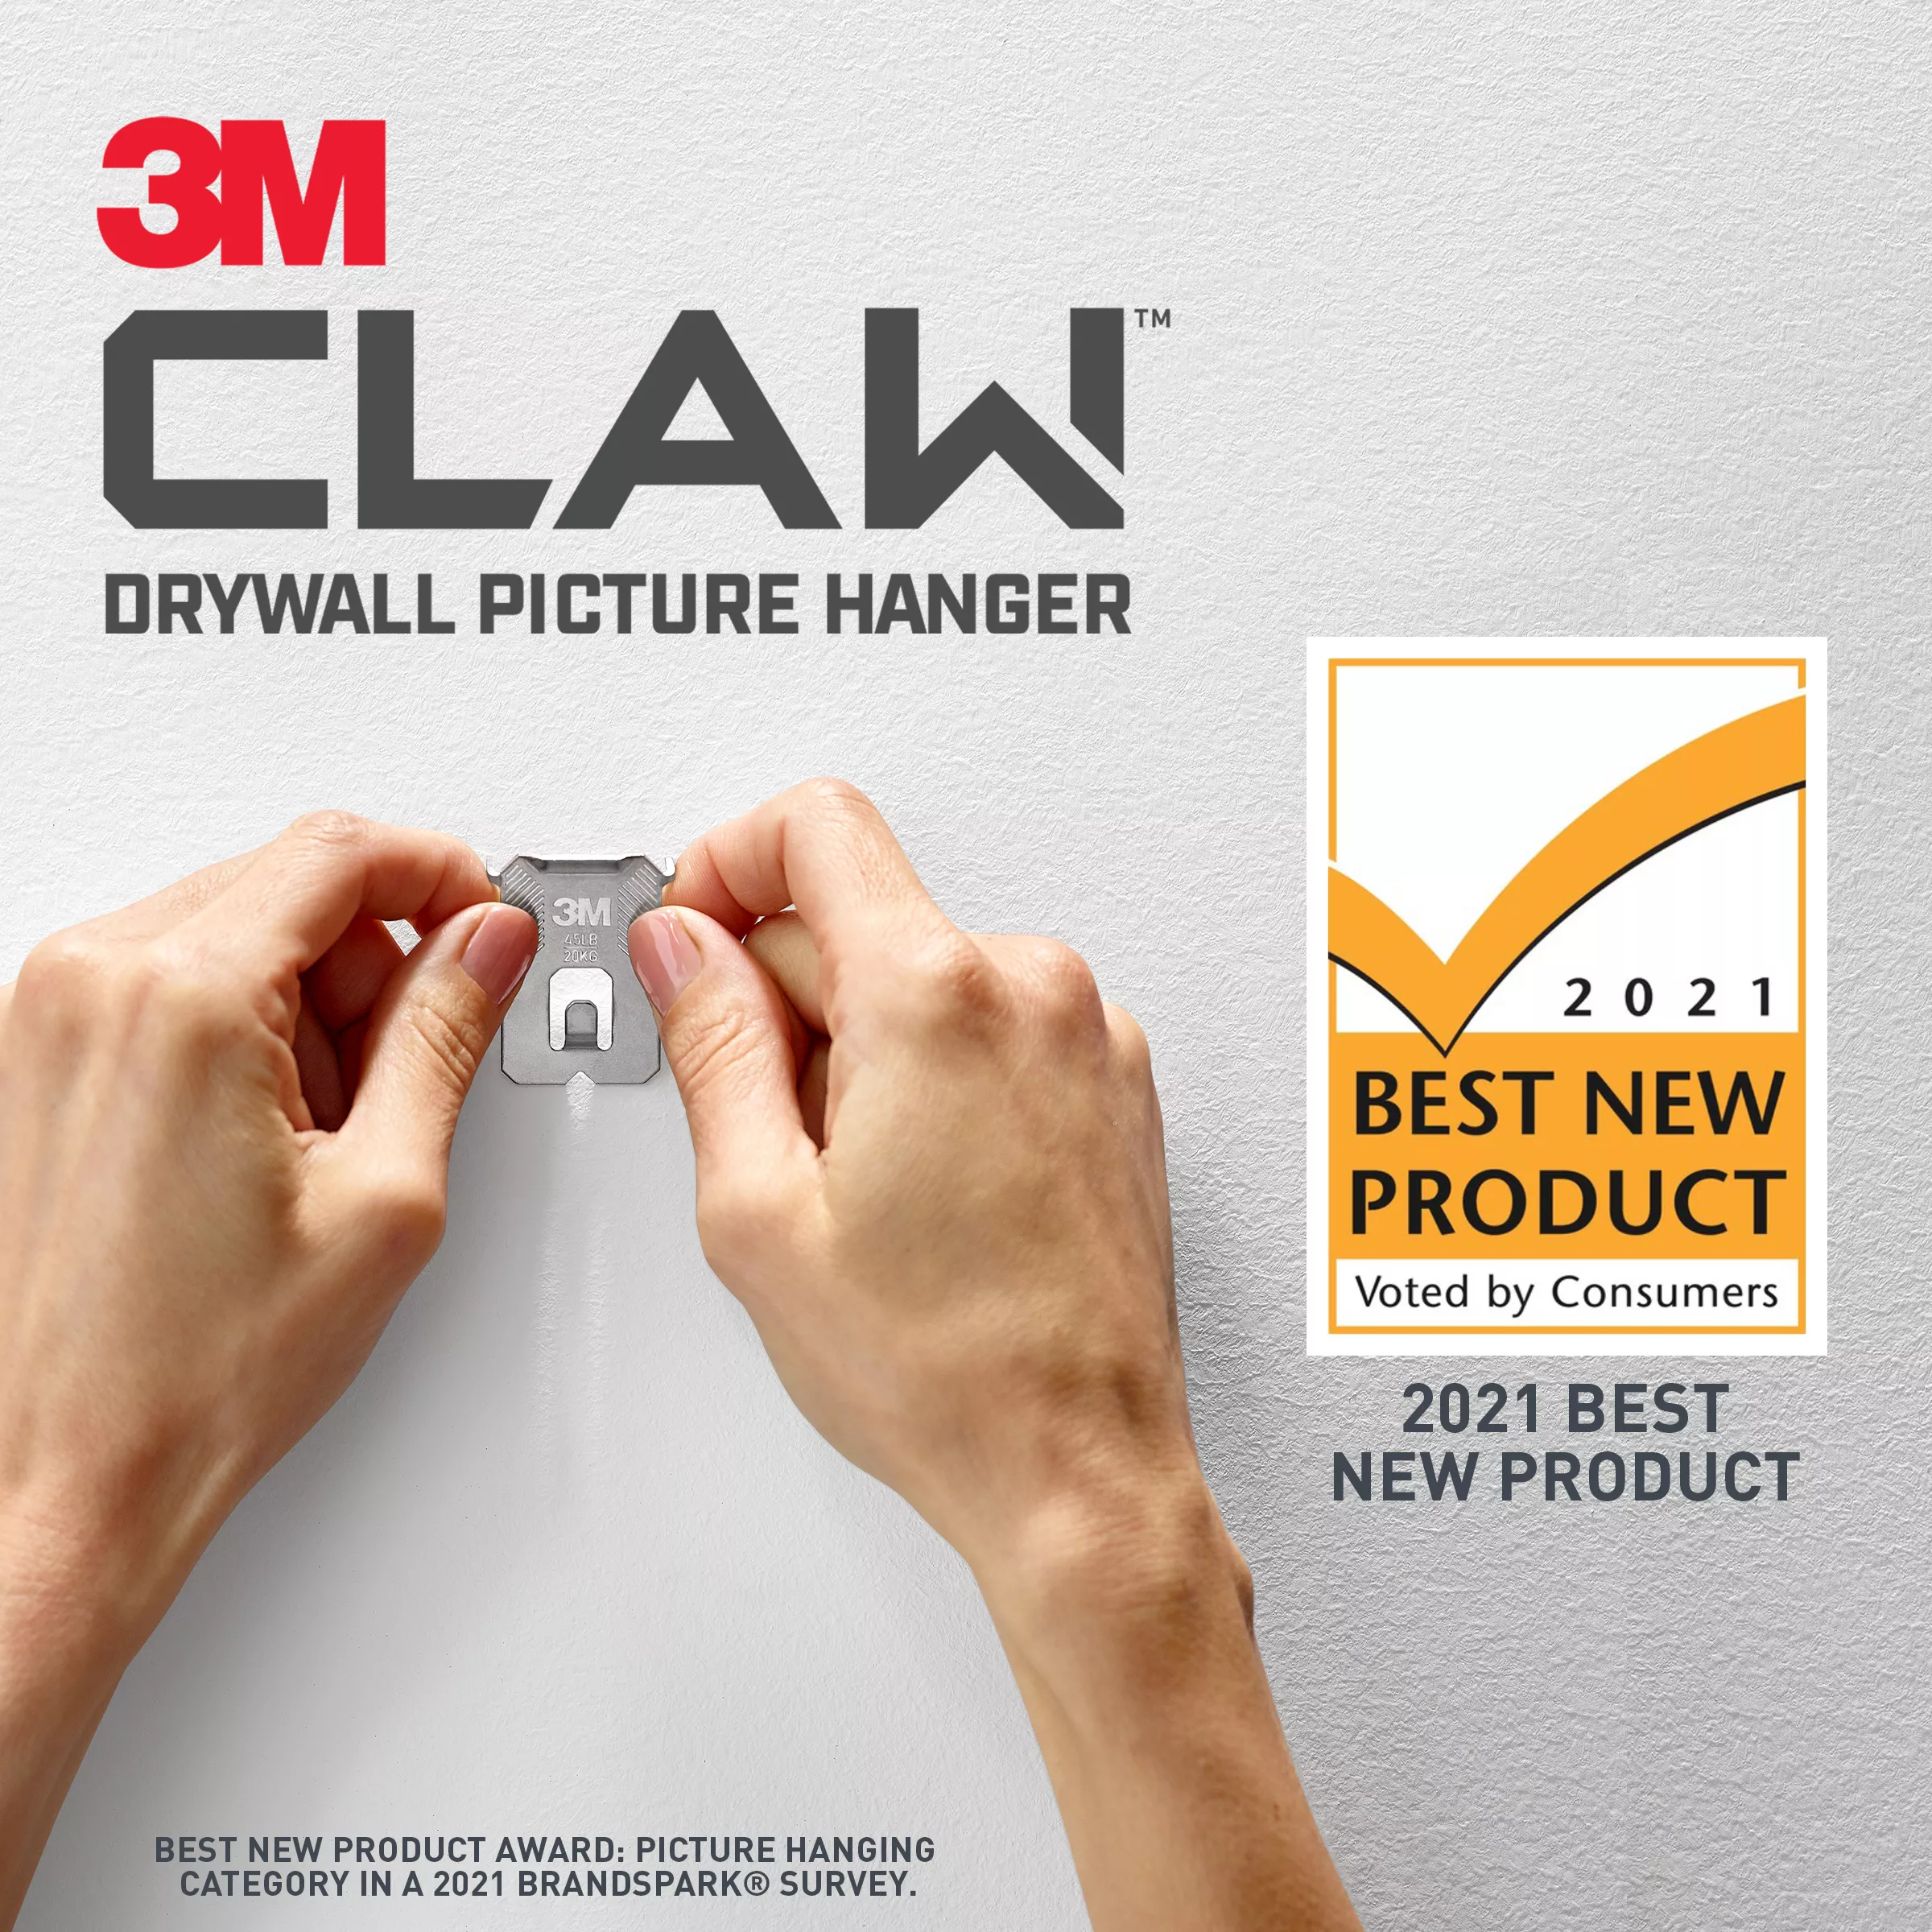 SKU 7100259165 | 3M CLAW™ Drywall Picture Hangers with Temporary Spot Markers 3PHKITM-8ES